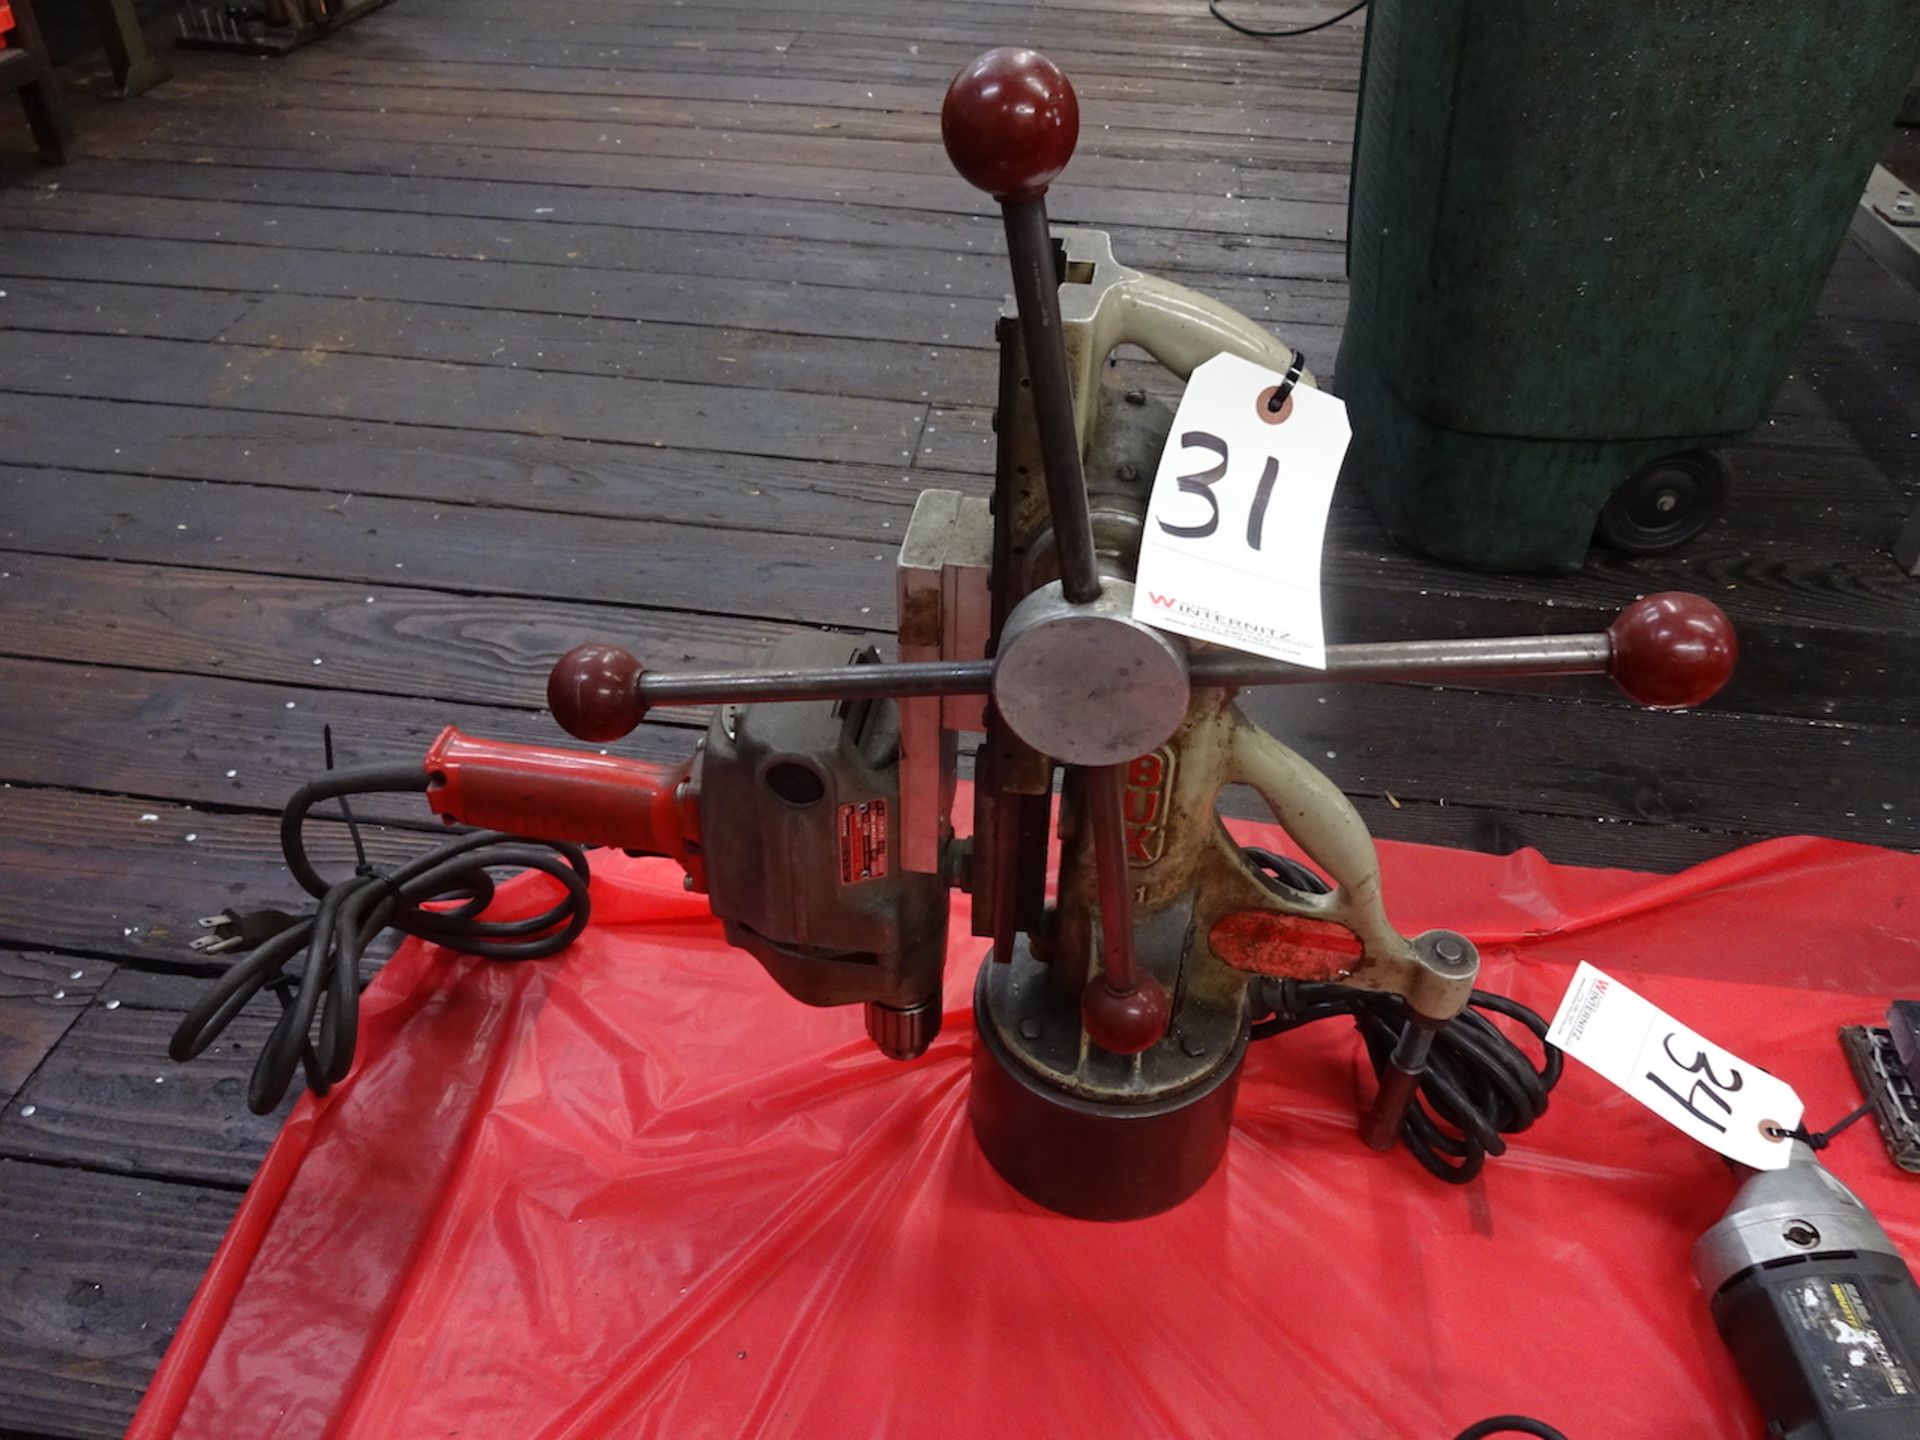 Bux Model L1 Magnetic Base Drill, with 1/2 in. Electric Drill